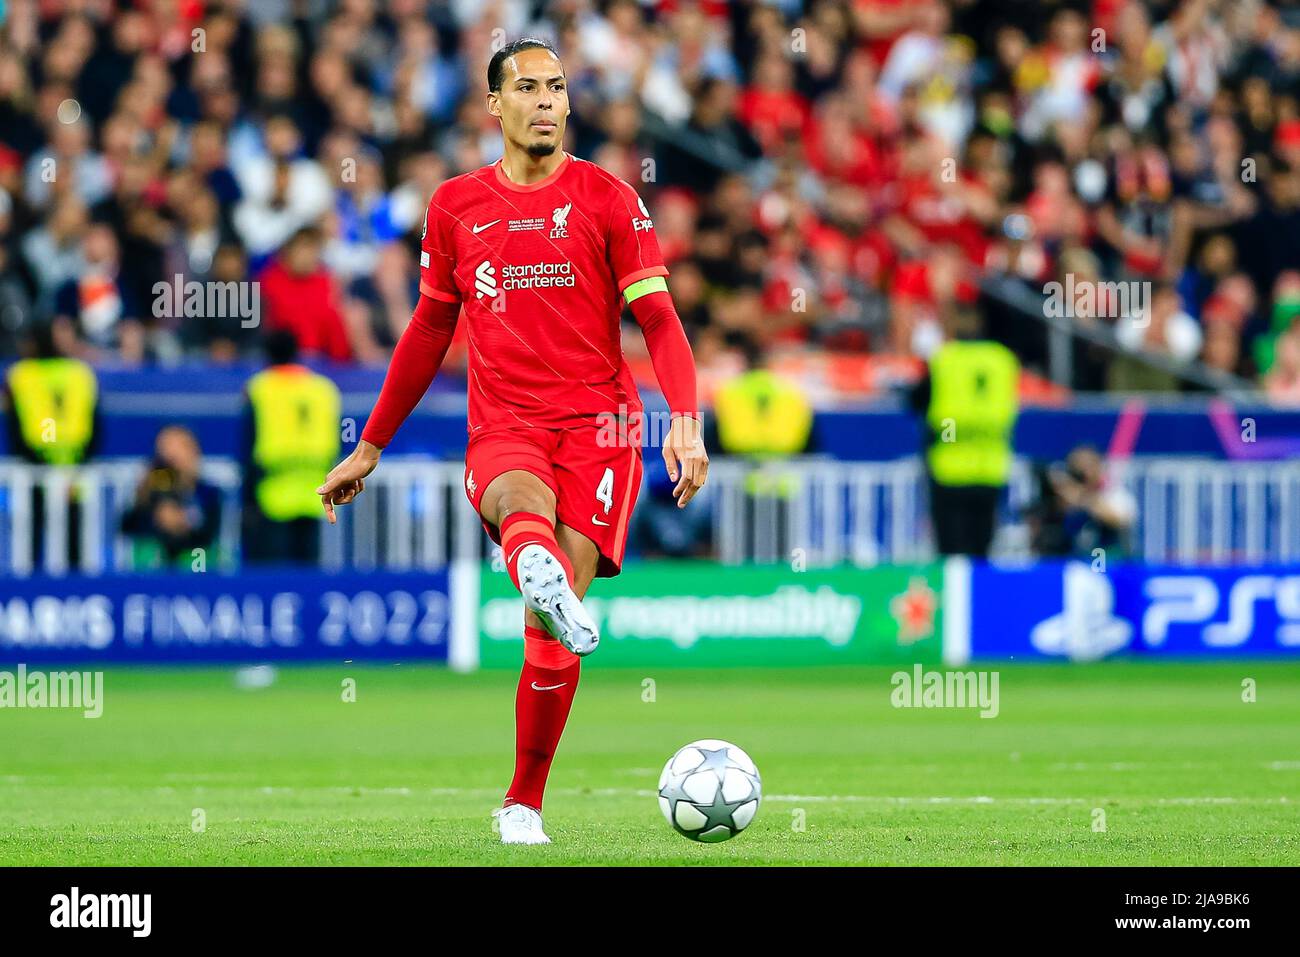 PARIS, FRANCE - MAY 28: Virgil van Dijk of Liverpool passes the ball during  the UEFA Champions League final match between Liverpool FC and Real Madrid  at Stade de France on May